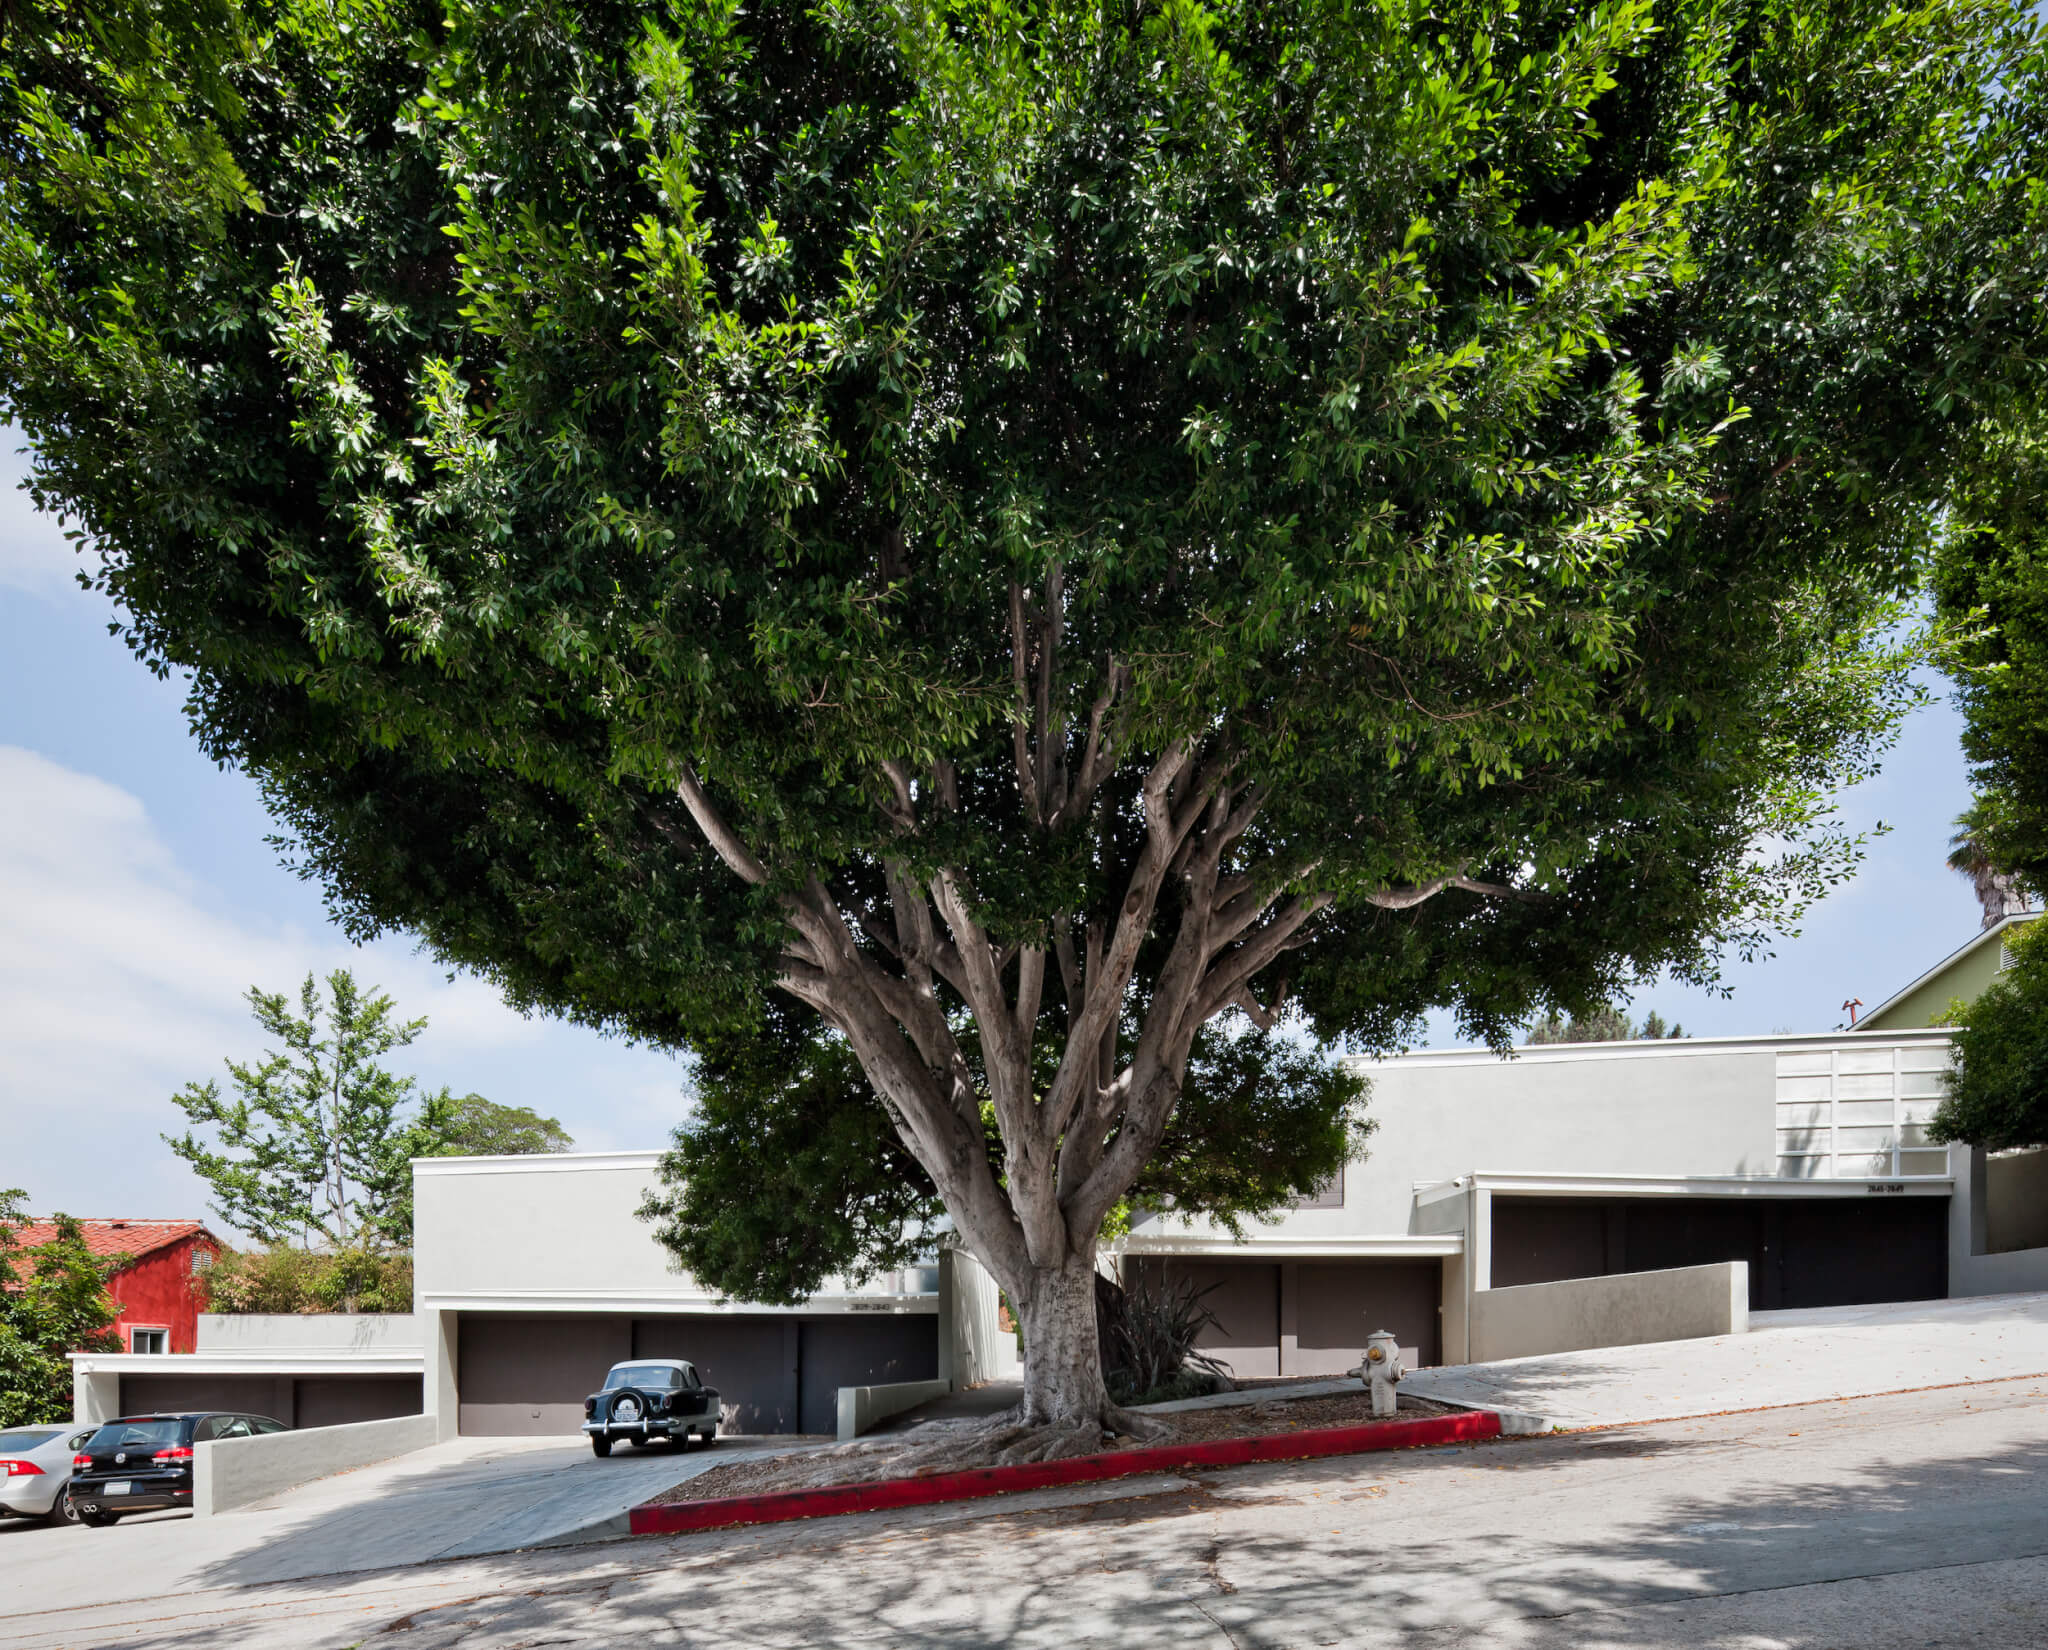 a modernist home on a hilly street with a large tree out front